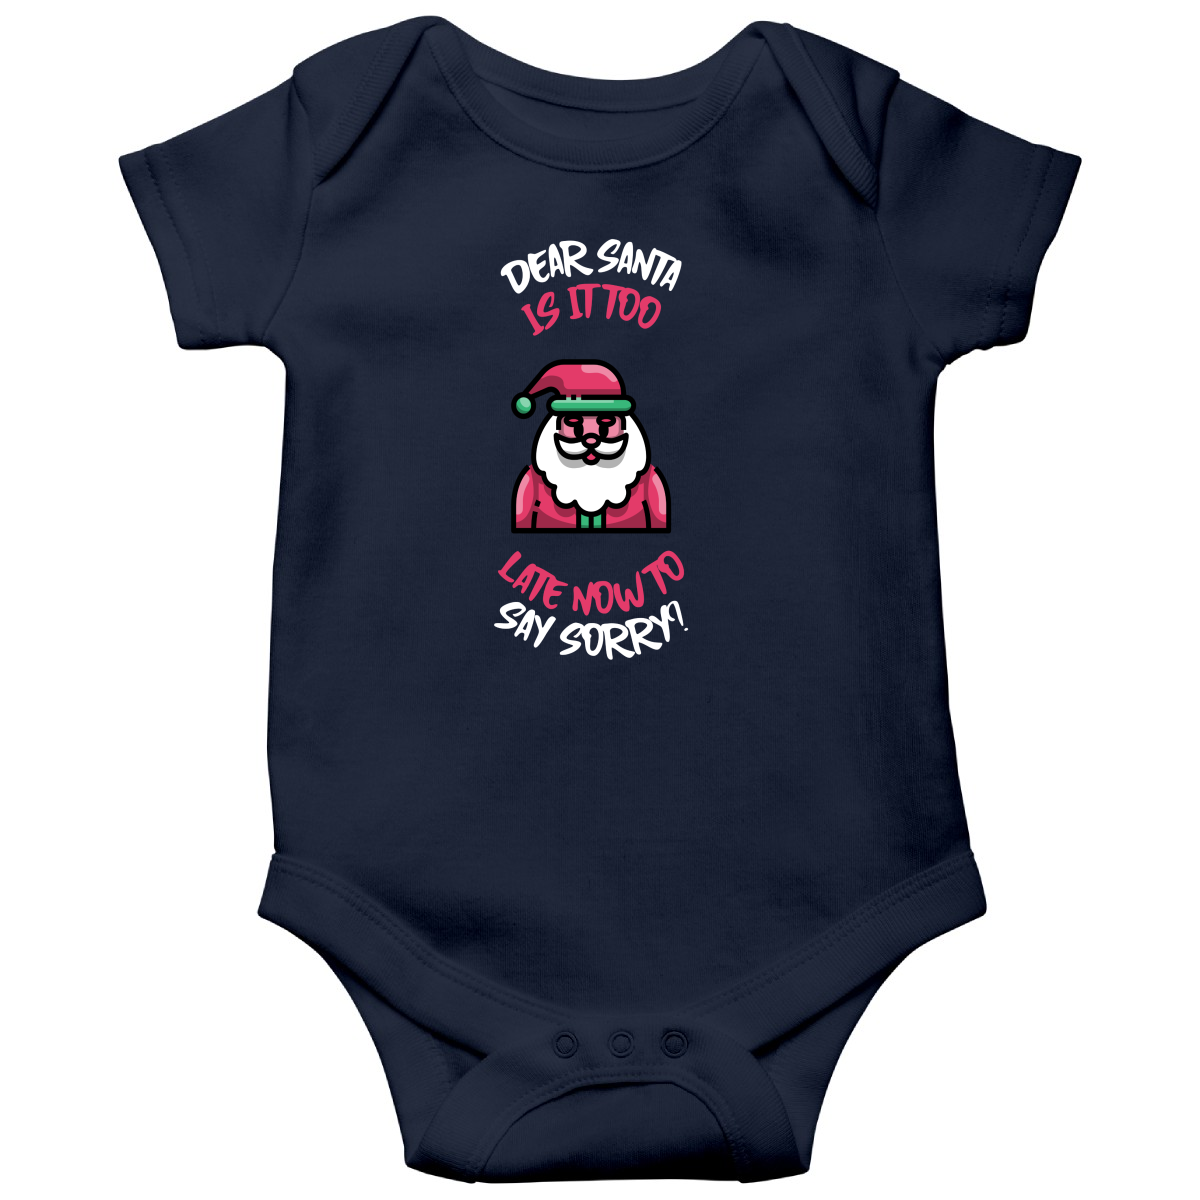 Dear Santa, Is It Too Late to Say Sorry? Baby Bodysuits